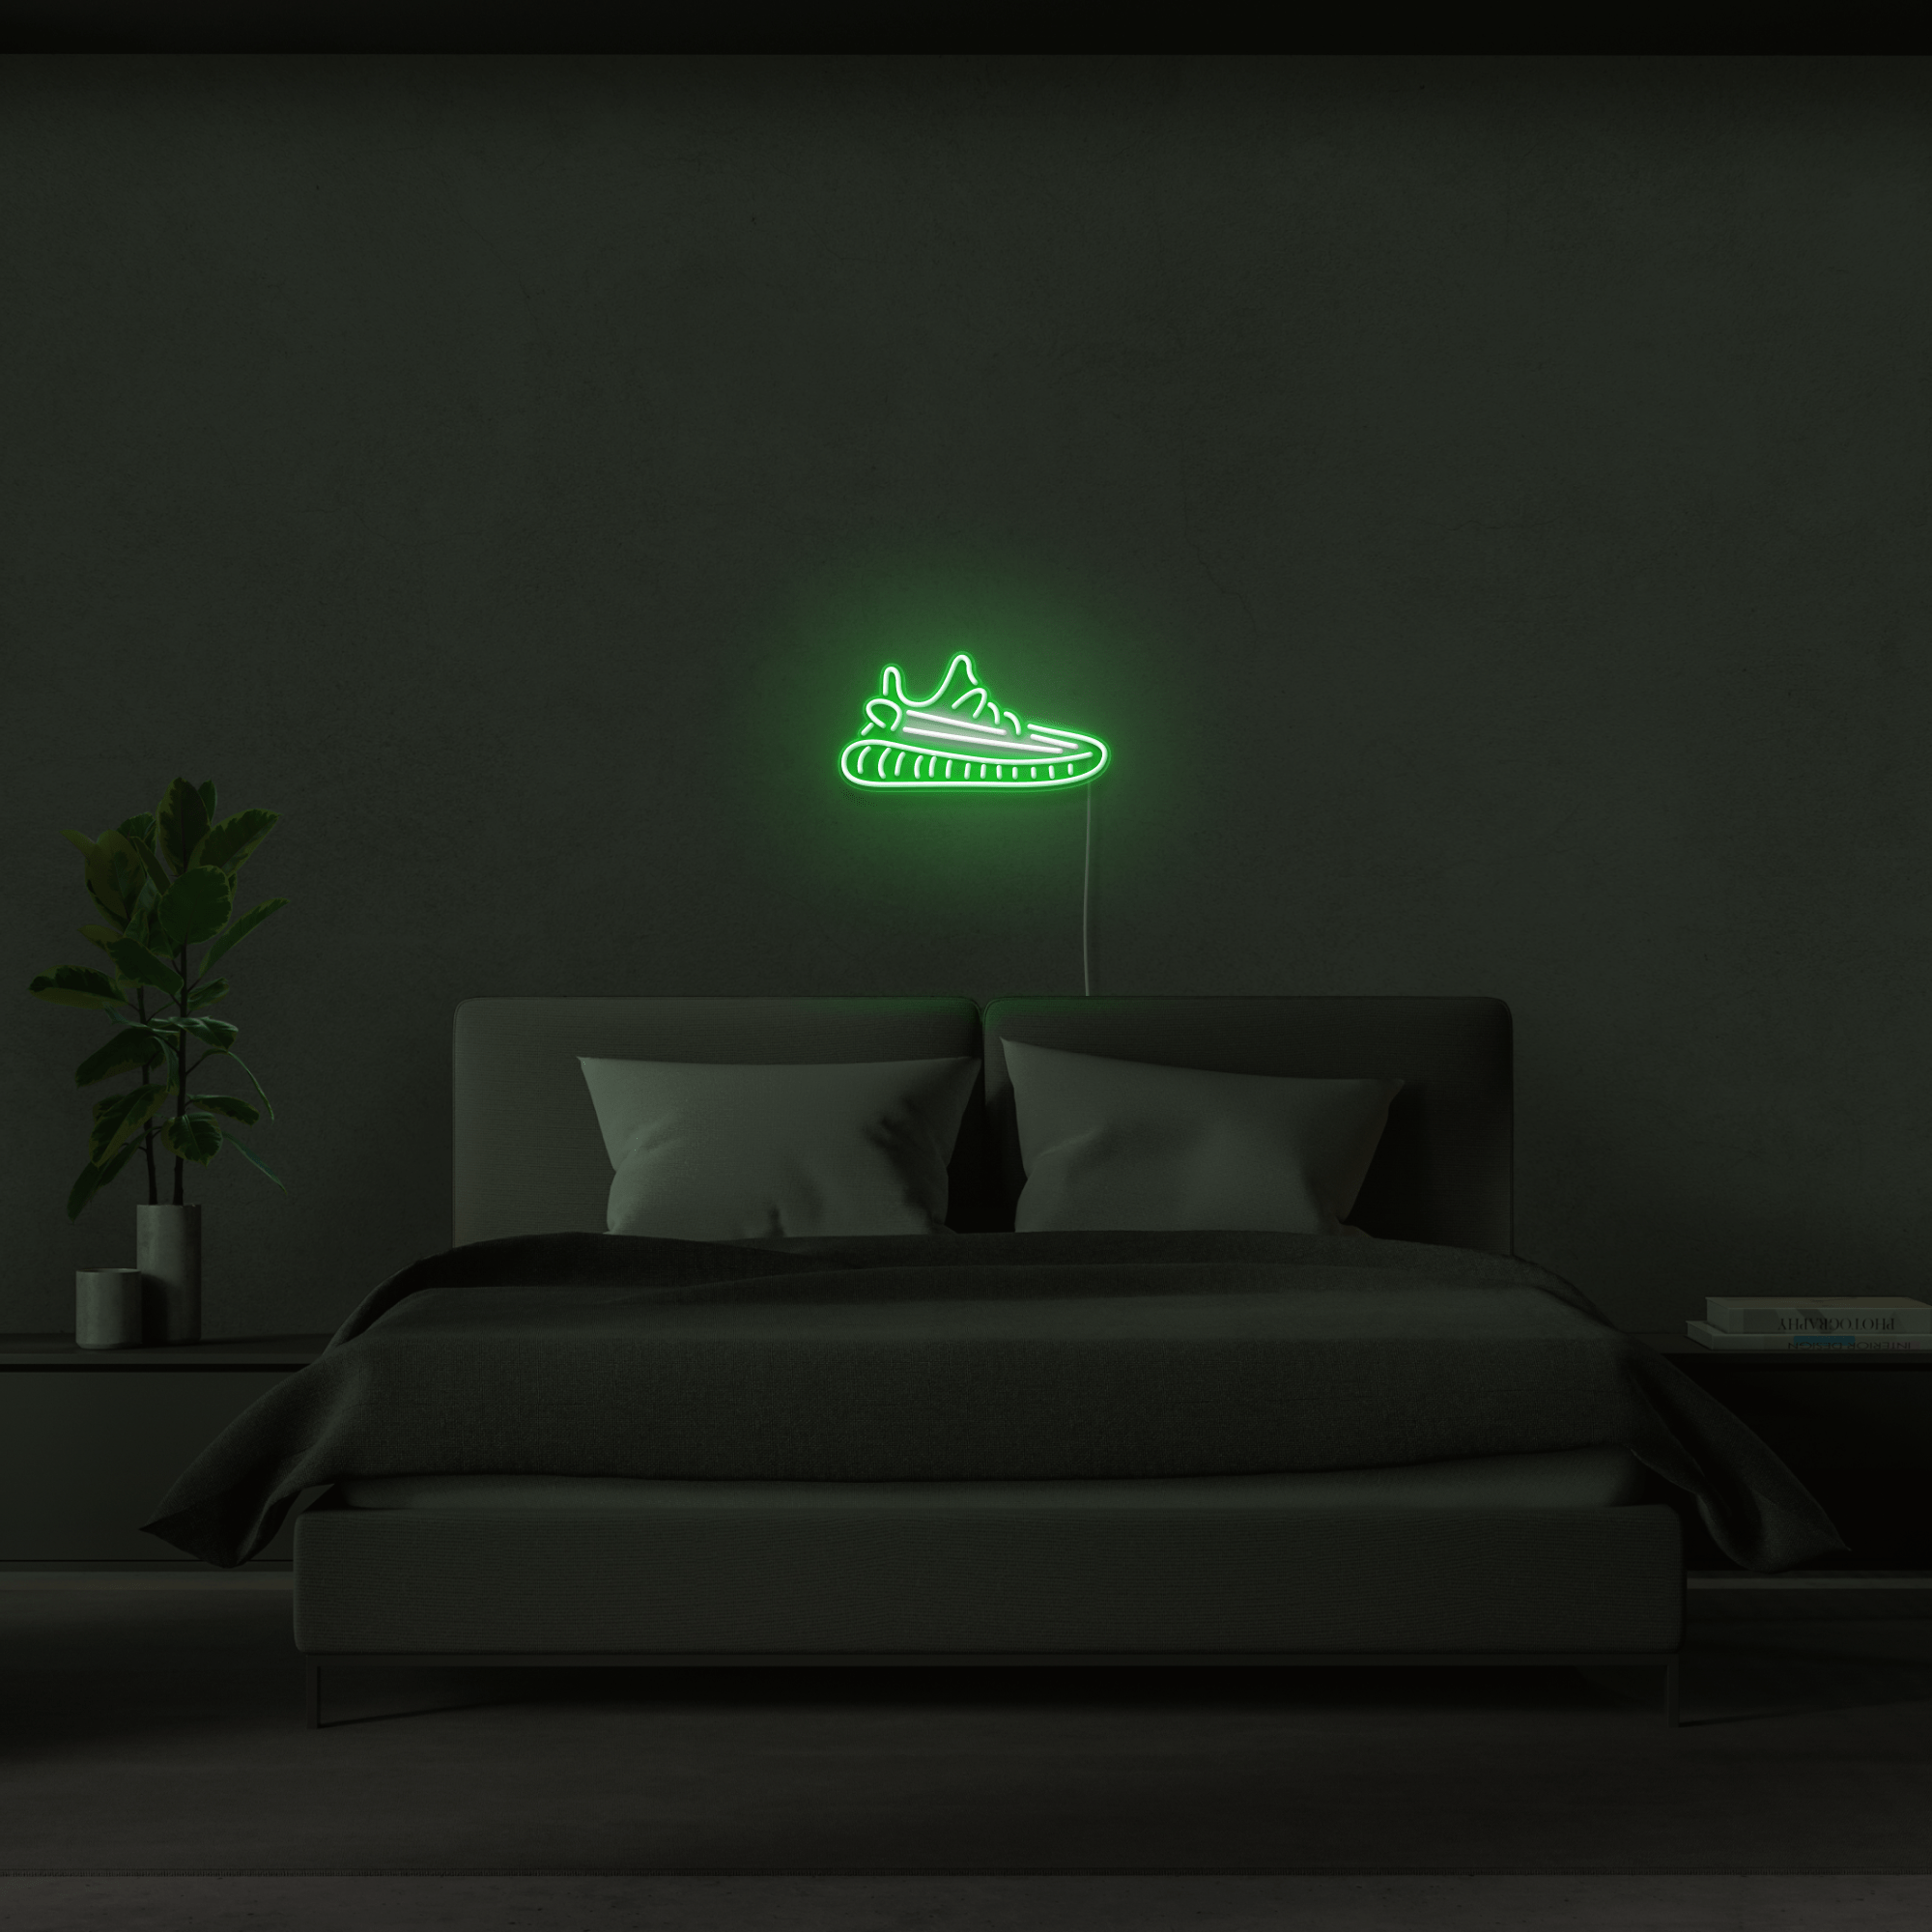 Yeezy Boosts - LED neon sign - StreetLyte